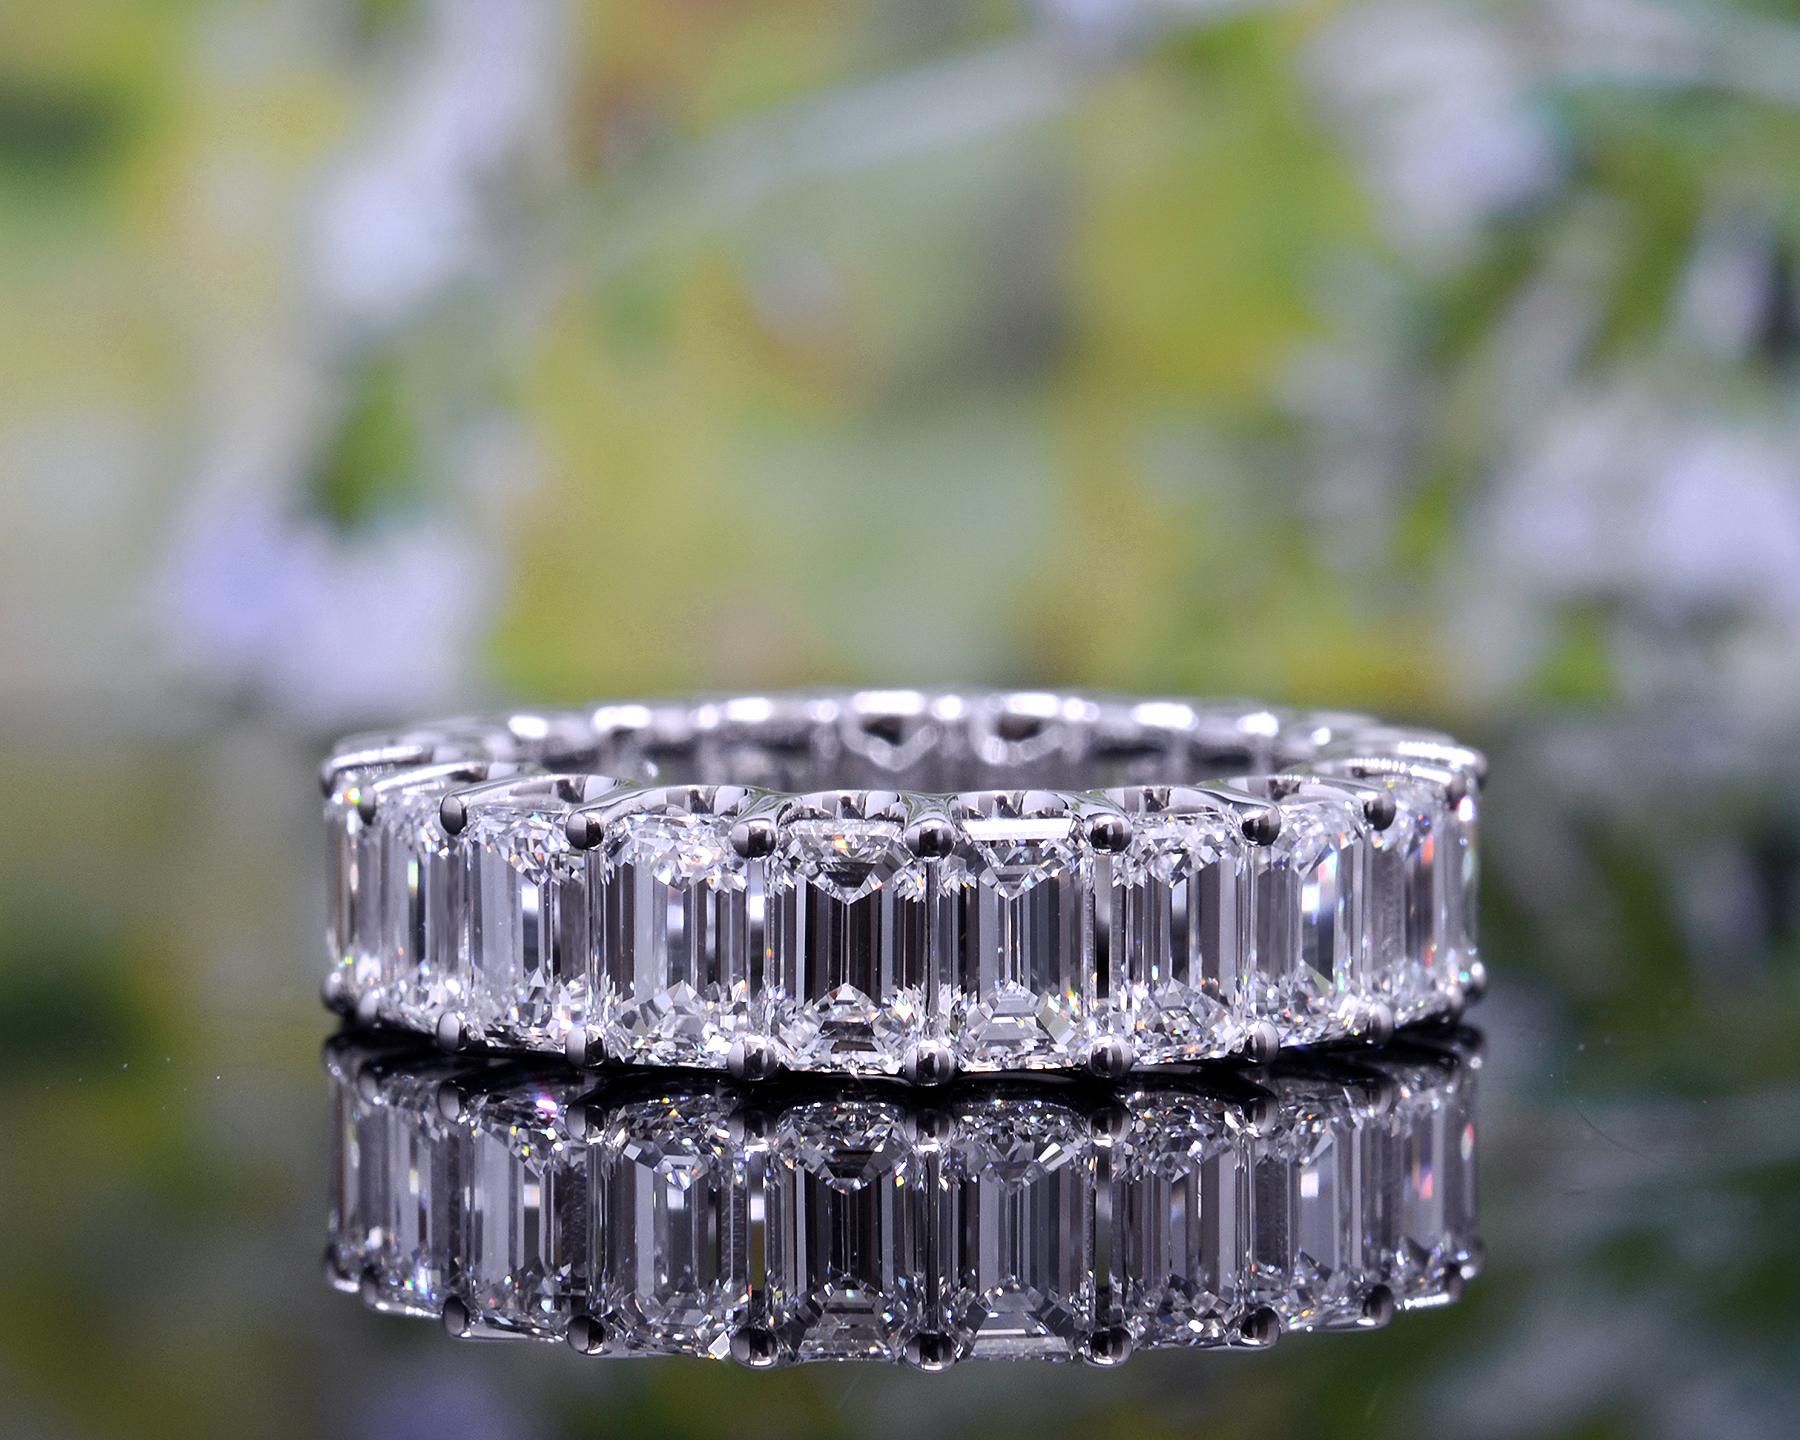 For Sale:  6 Carats Emerald Cut Eternity Band Shared Prongs F-G Color VS1 Clarity 18k Gold 2